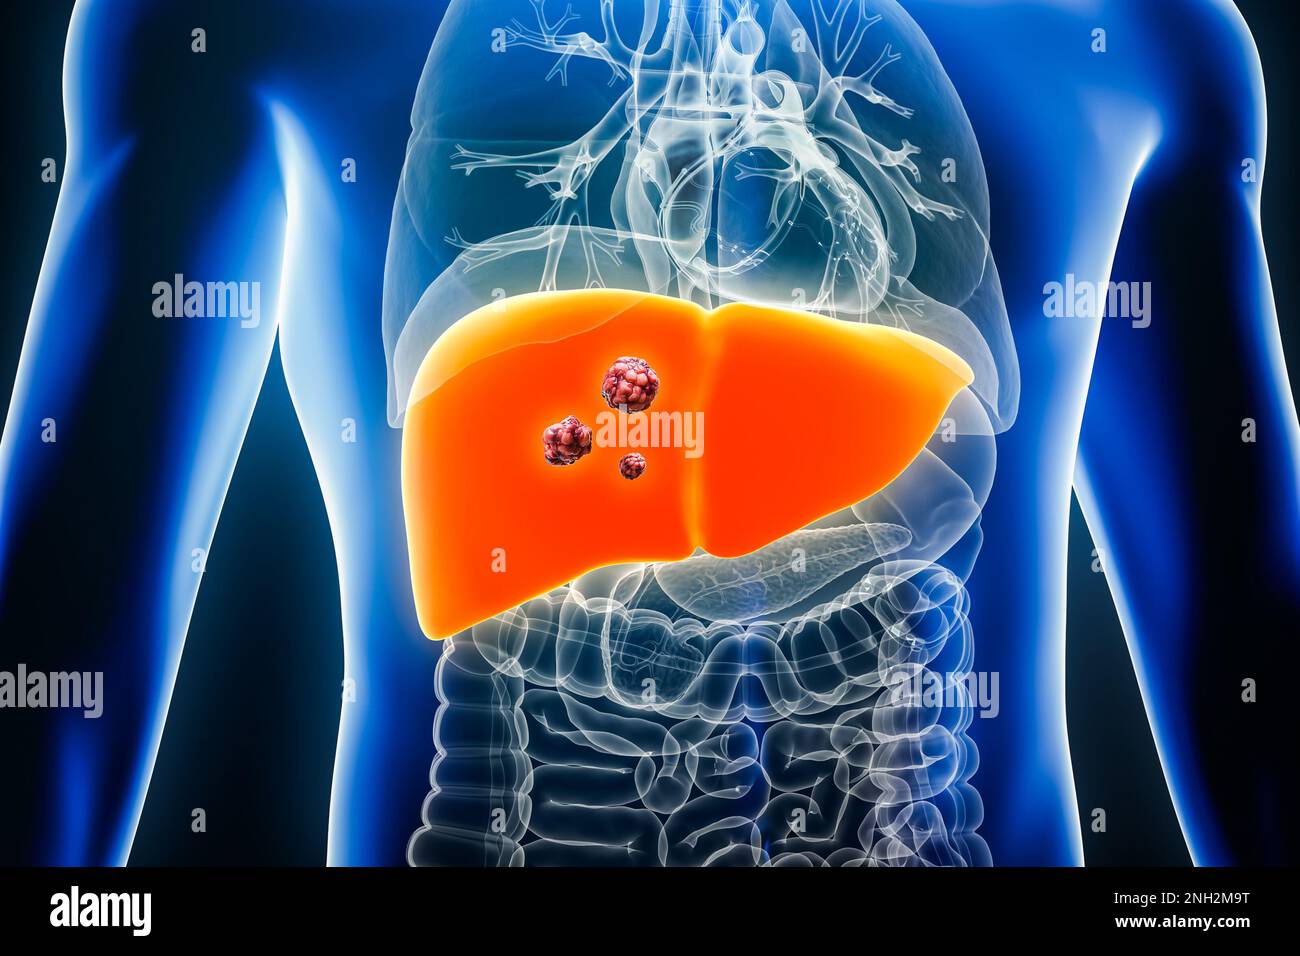 Liver cancer with organs and tumors or cancerous cells 3D rendering illustration. Anatomy, oncology, biomedical, disease, medical, biology, science, h Stock Photo